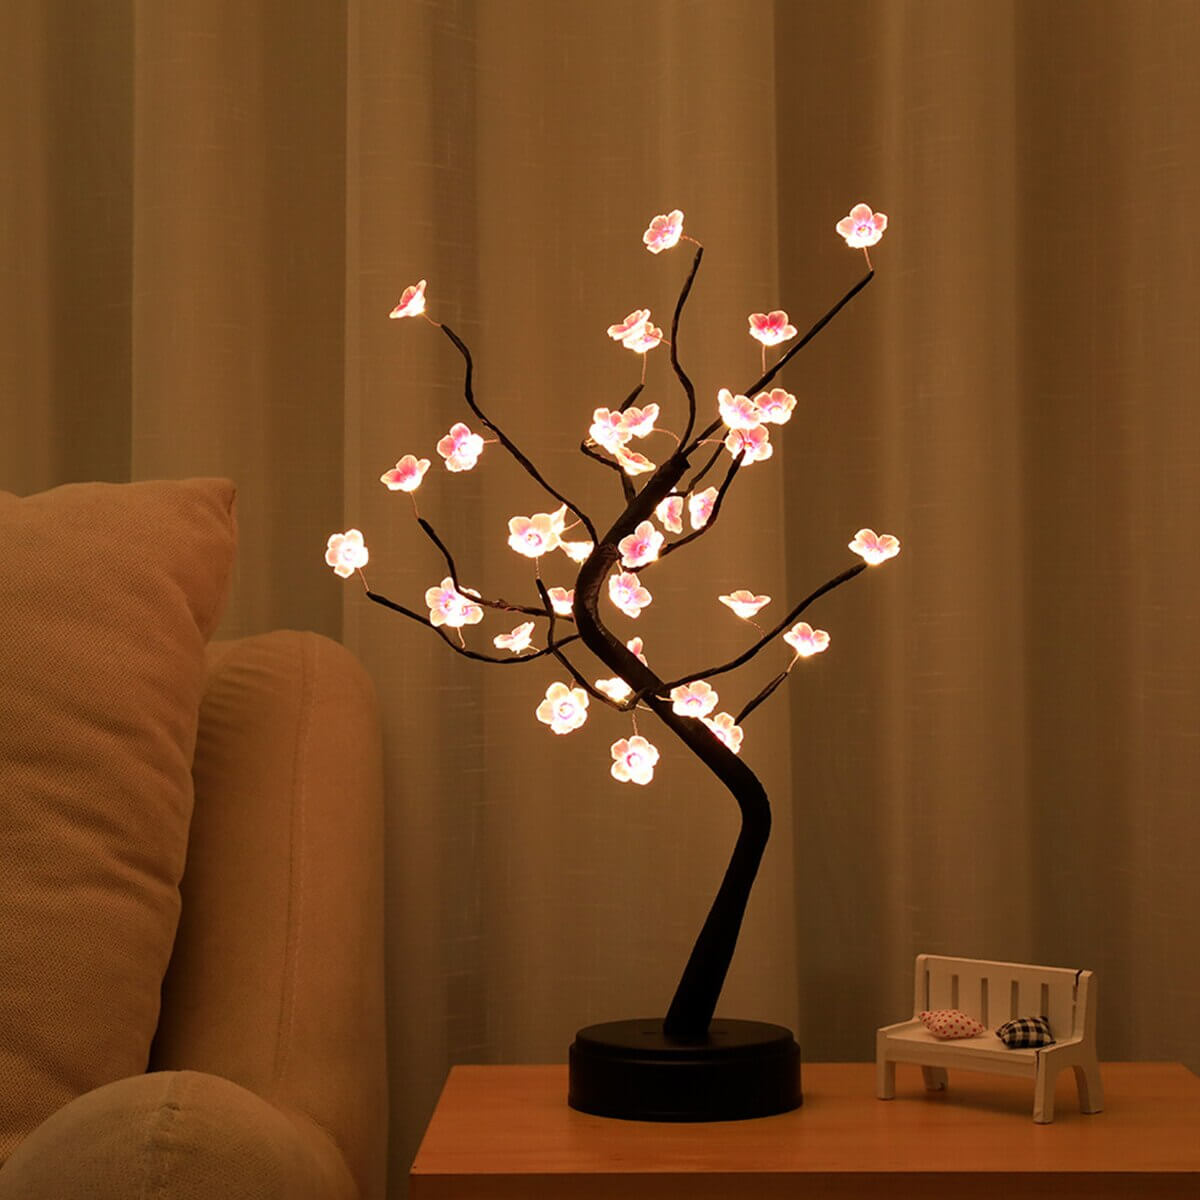 Decorative Lamps for End Tables Side Tables Bedside Tables